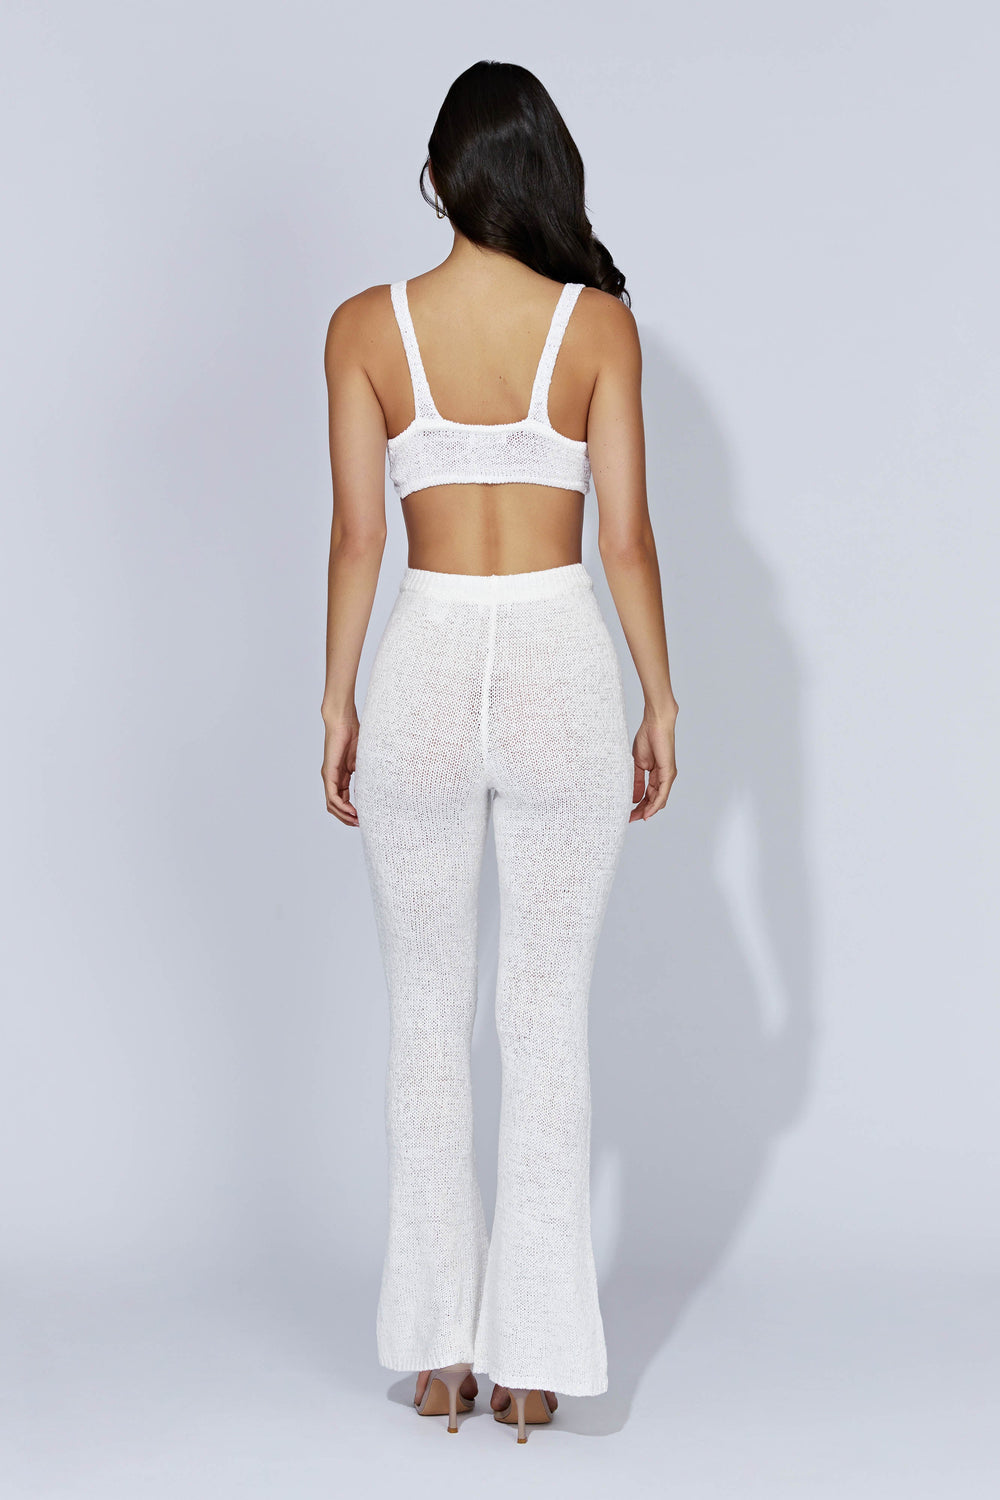 Mary Knit Flared Pants - White